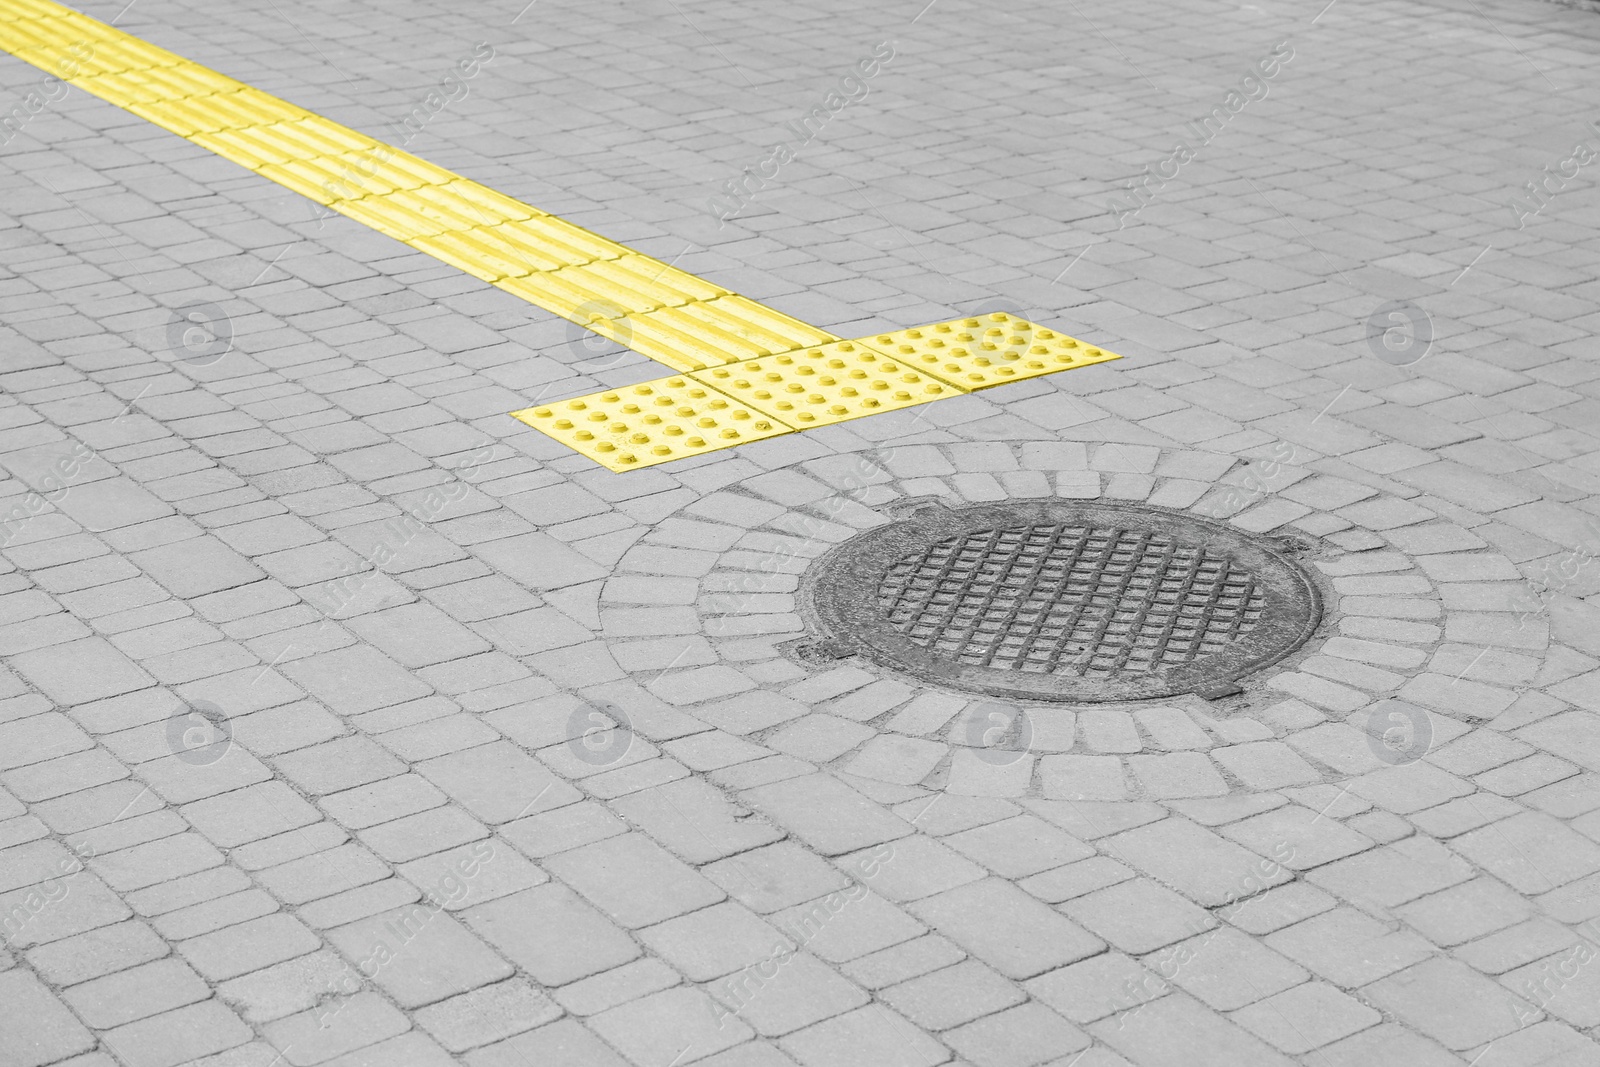 Photo of Metal sewer hatch on street tiles outdoors, space for text